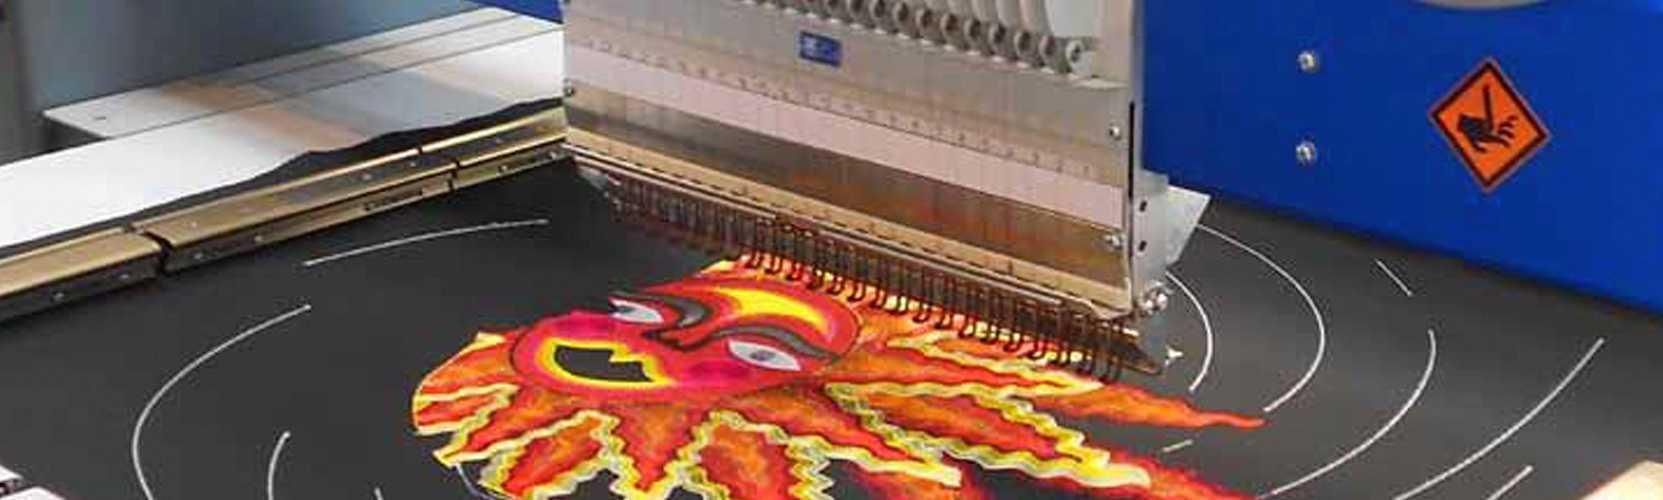 Most Versatile Embroidery Machine in the Industry